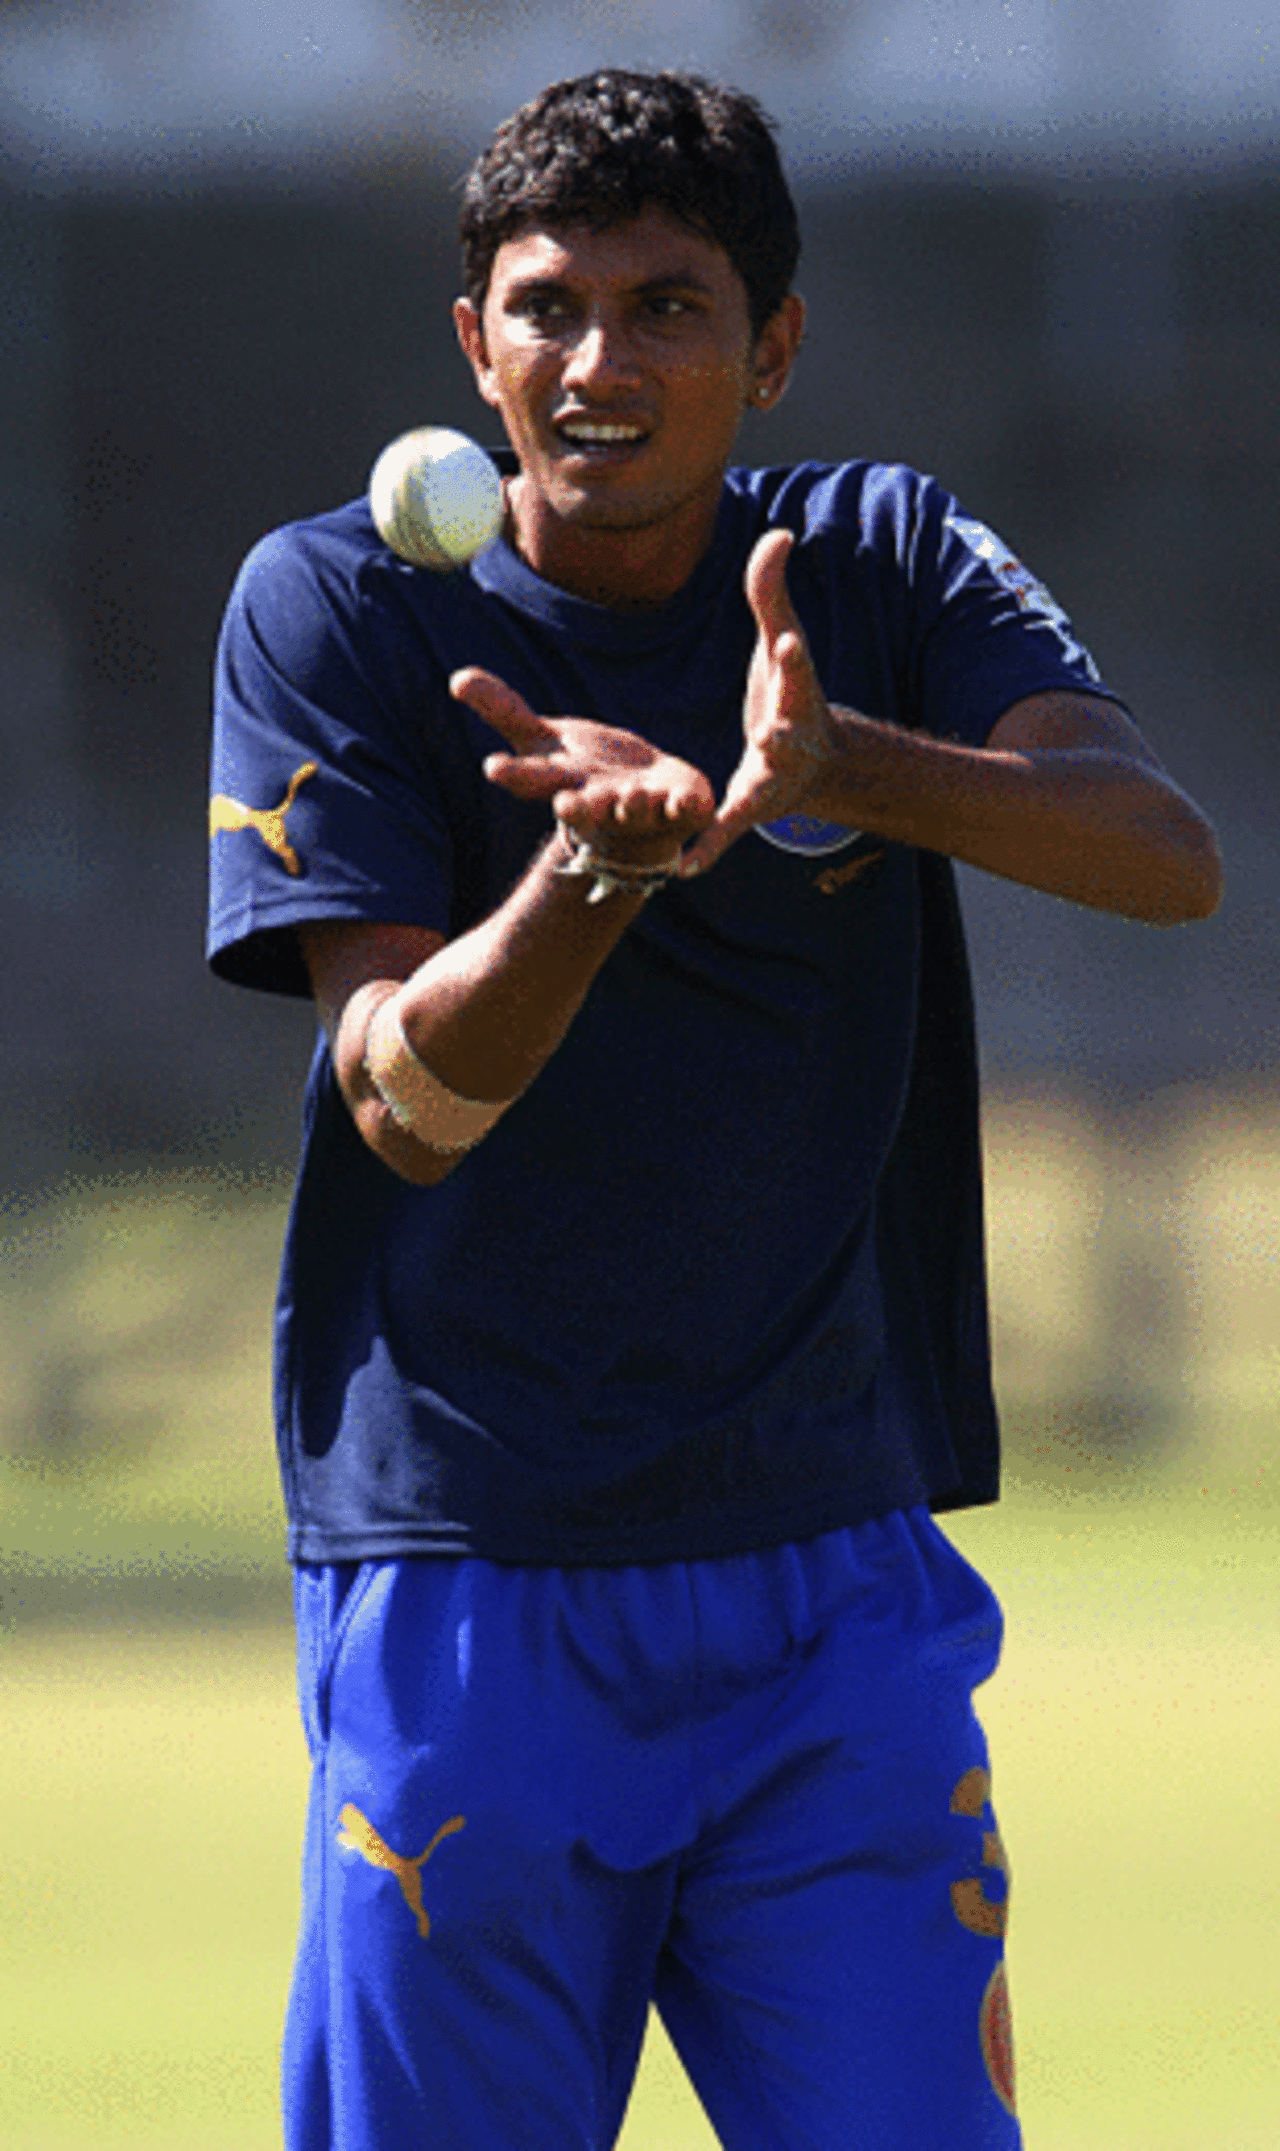 Siddharth Trivedi fields during a practice session for Rajasthan Royals, Cape Town, April 15, 2009